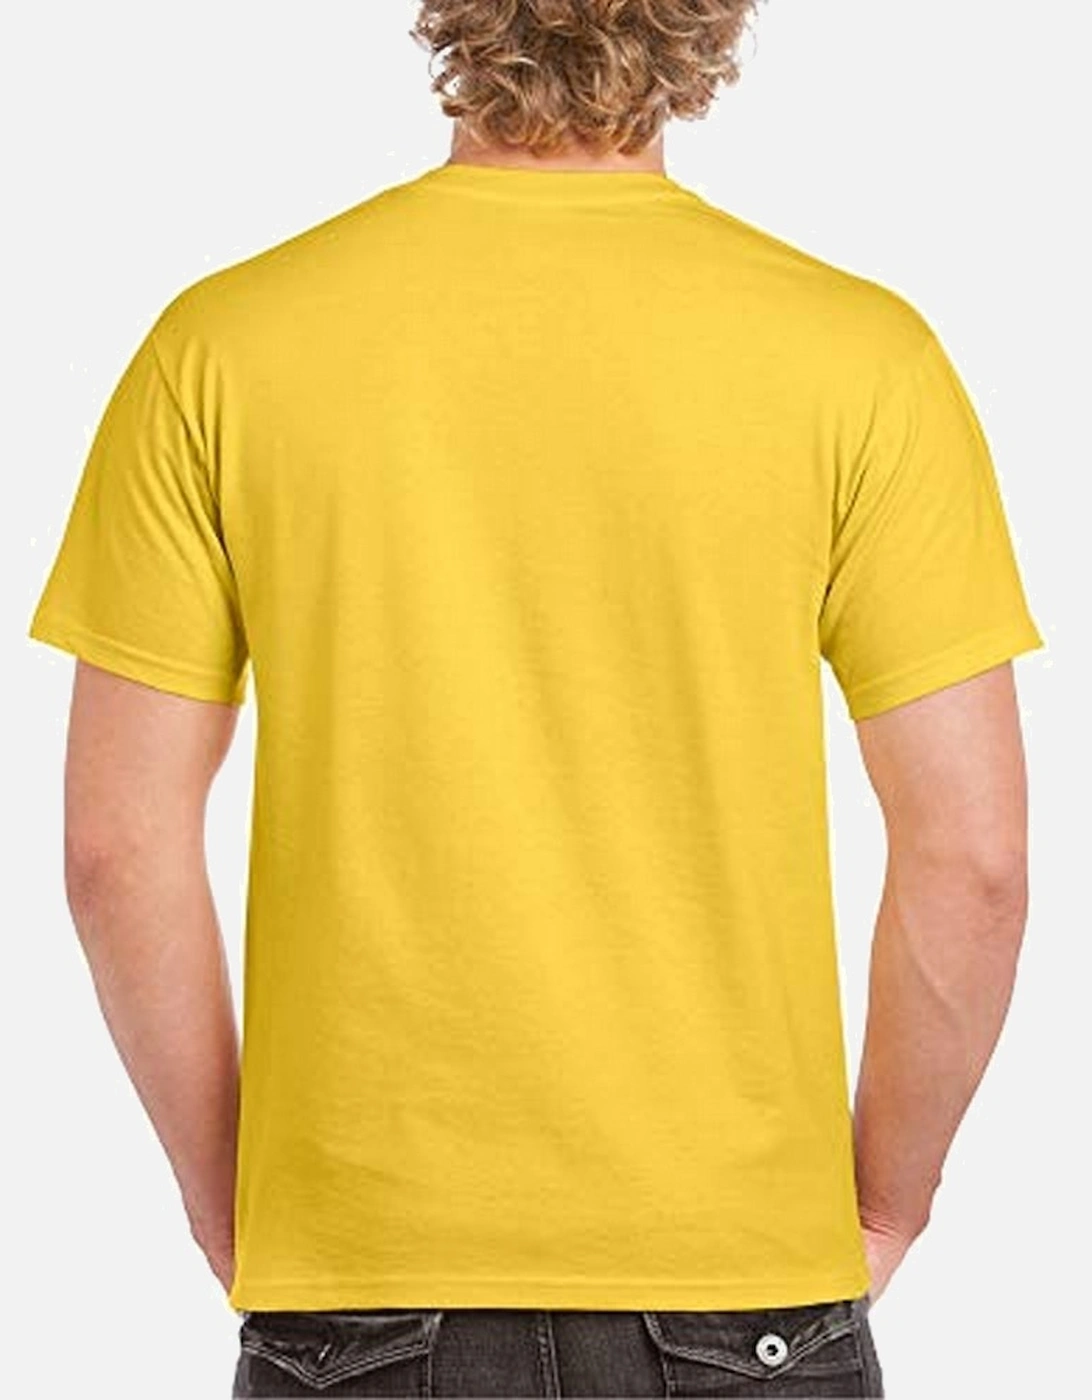 Mens Heavy Cotton Short Sleeve T-Shirt (Pack Of 5)